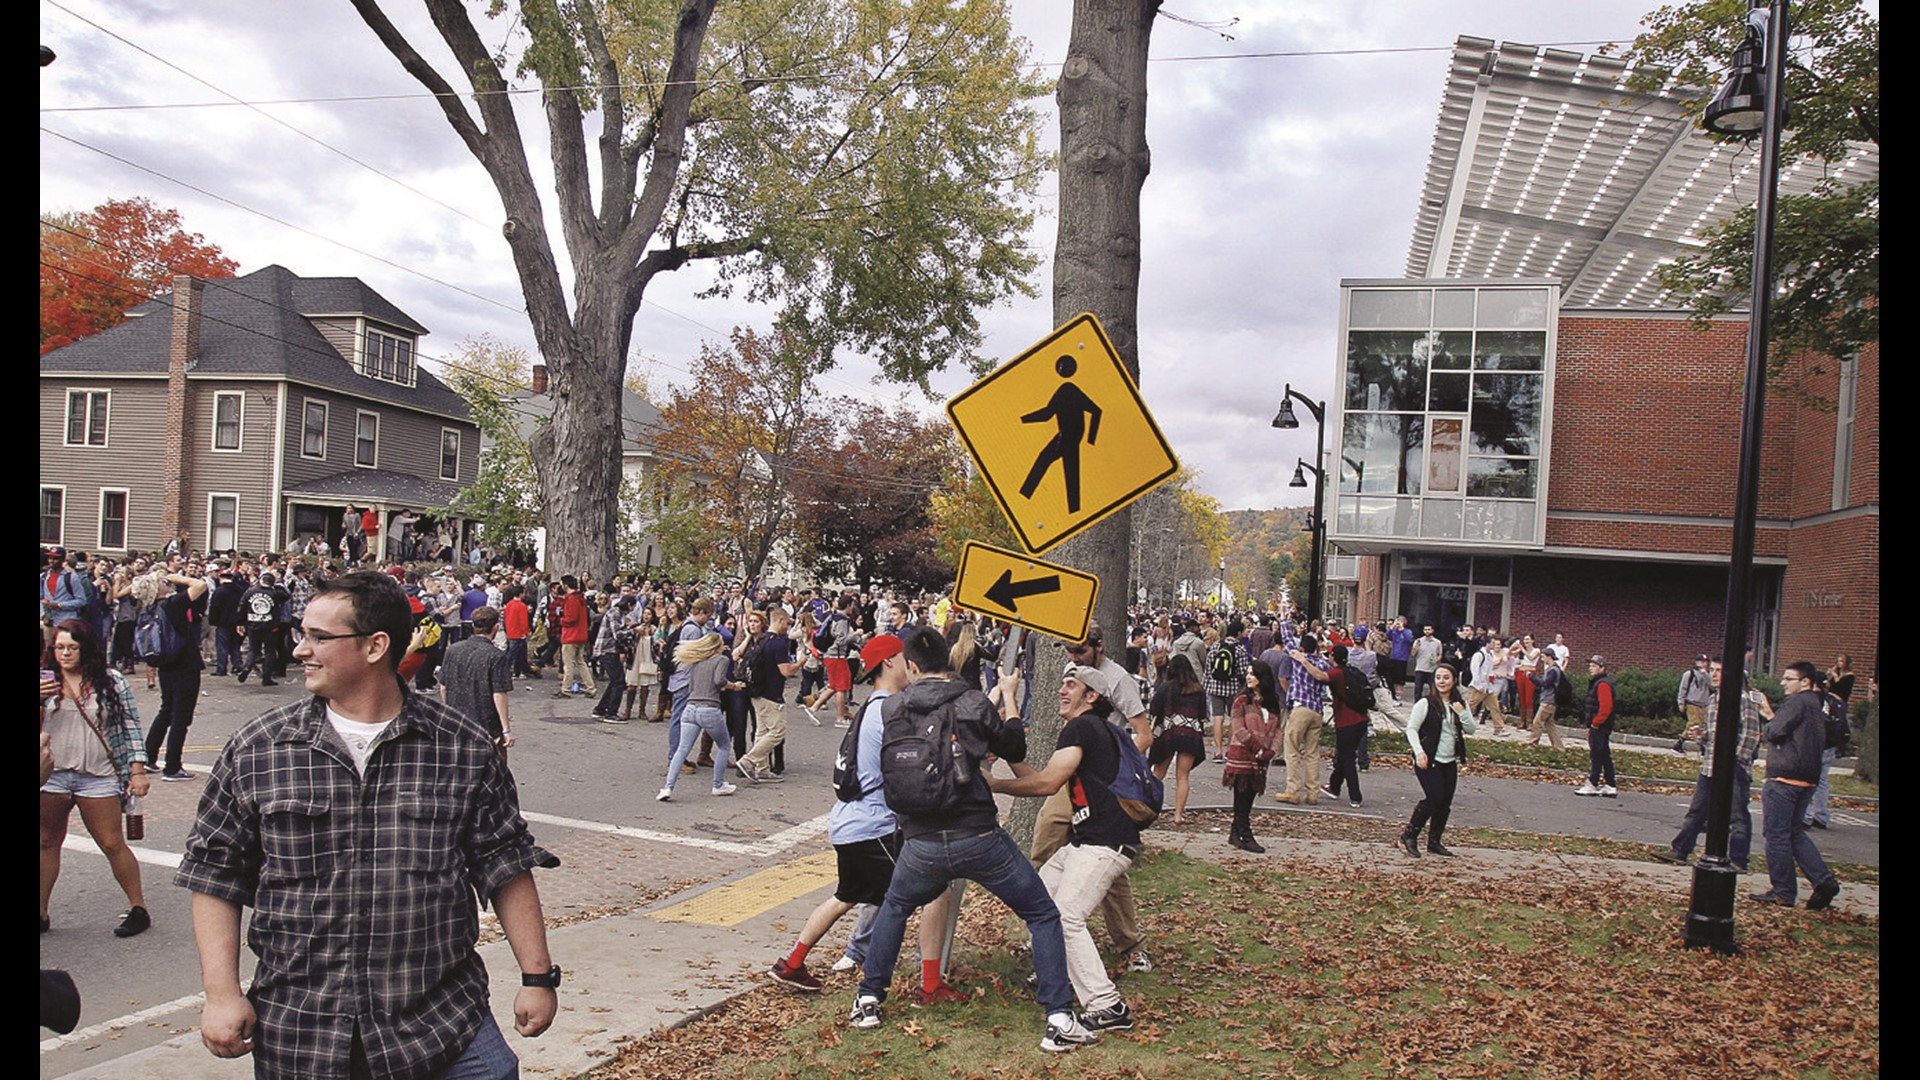 Keene NH rejects pumpkin festival after last year’s violence